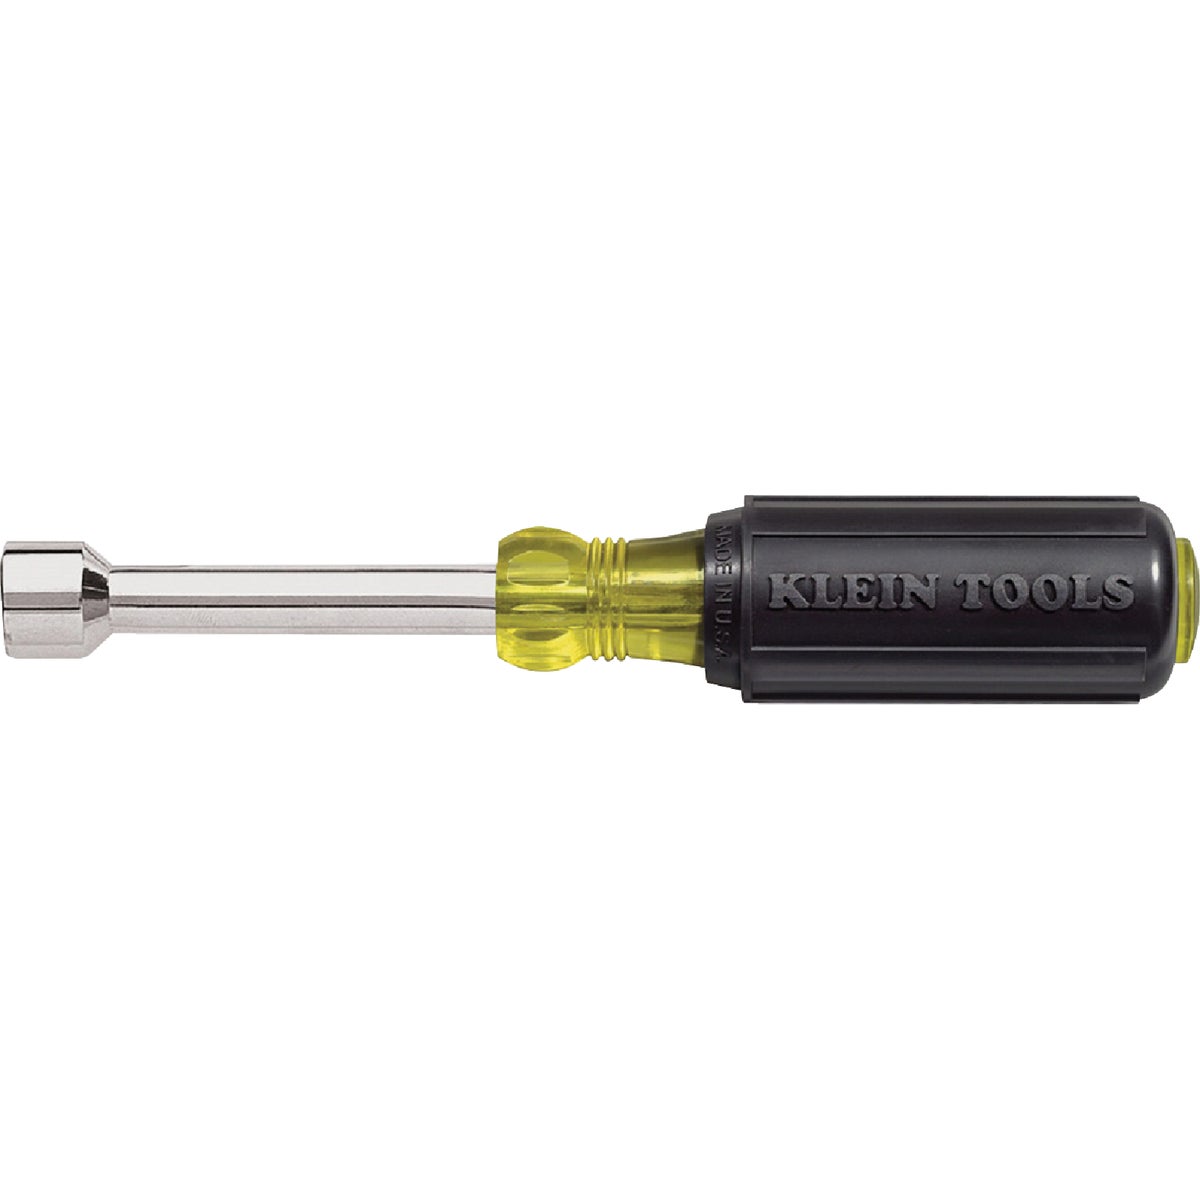 Klein Standard 1/4 In. Nut Driver with 3 In. Hollow Shank